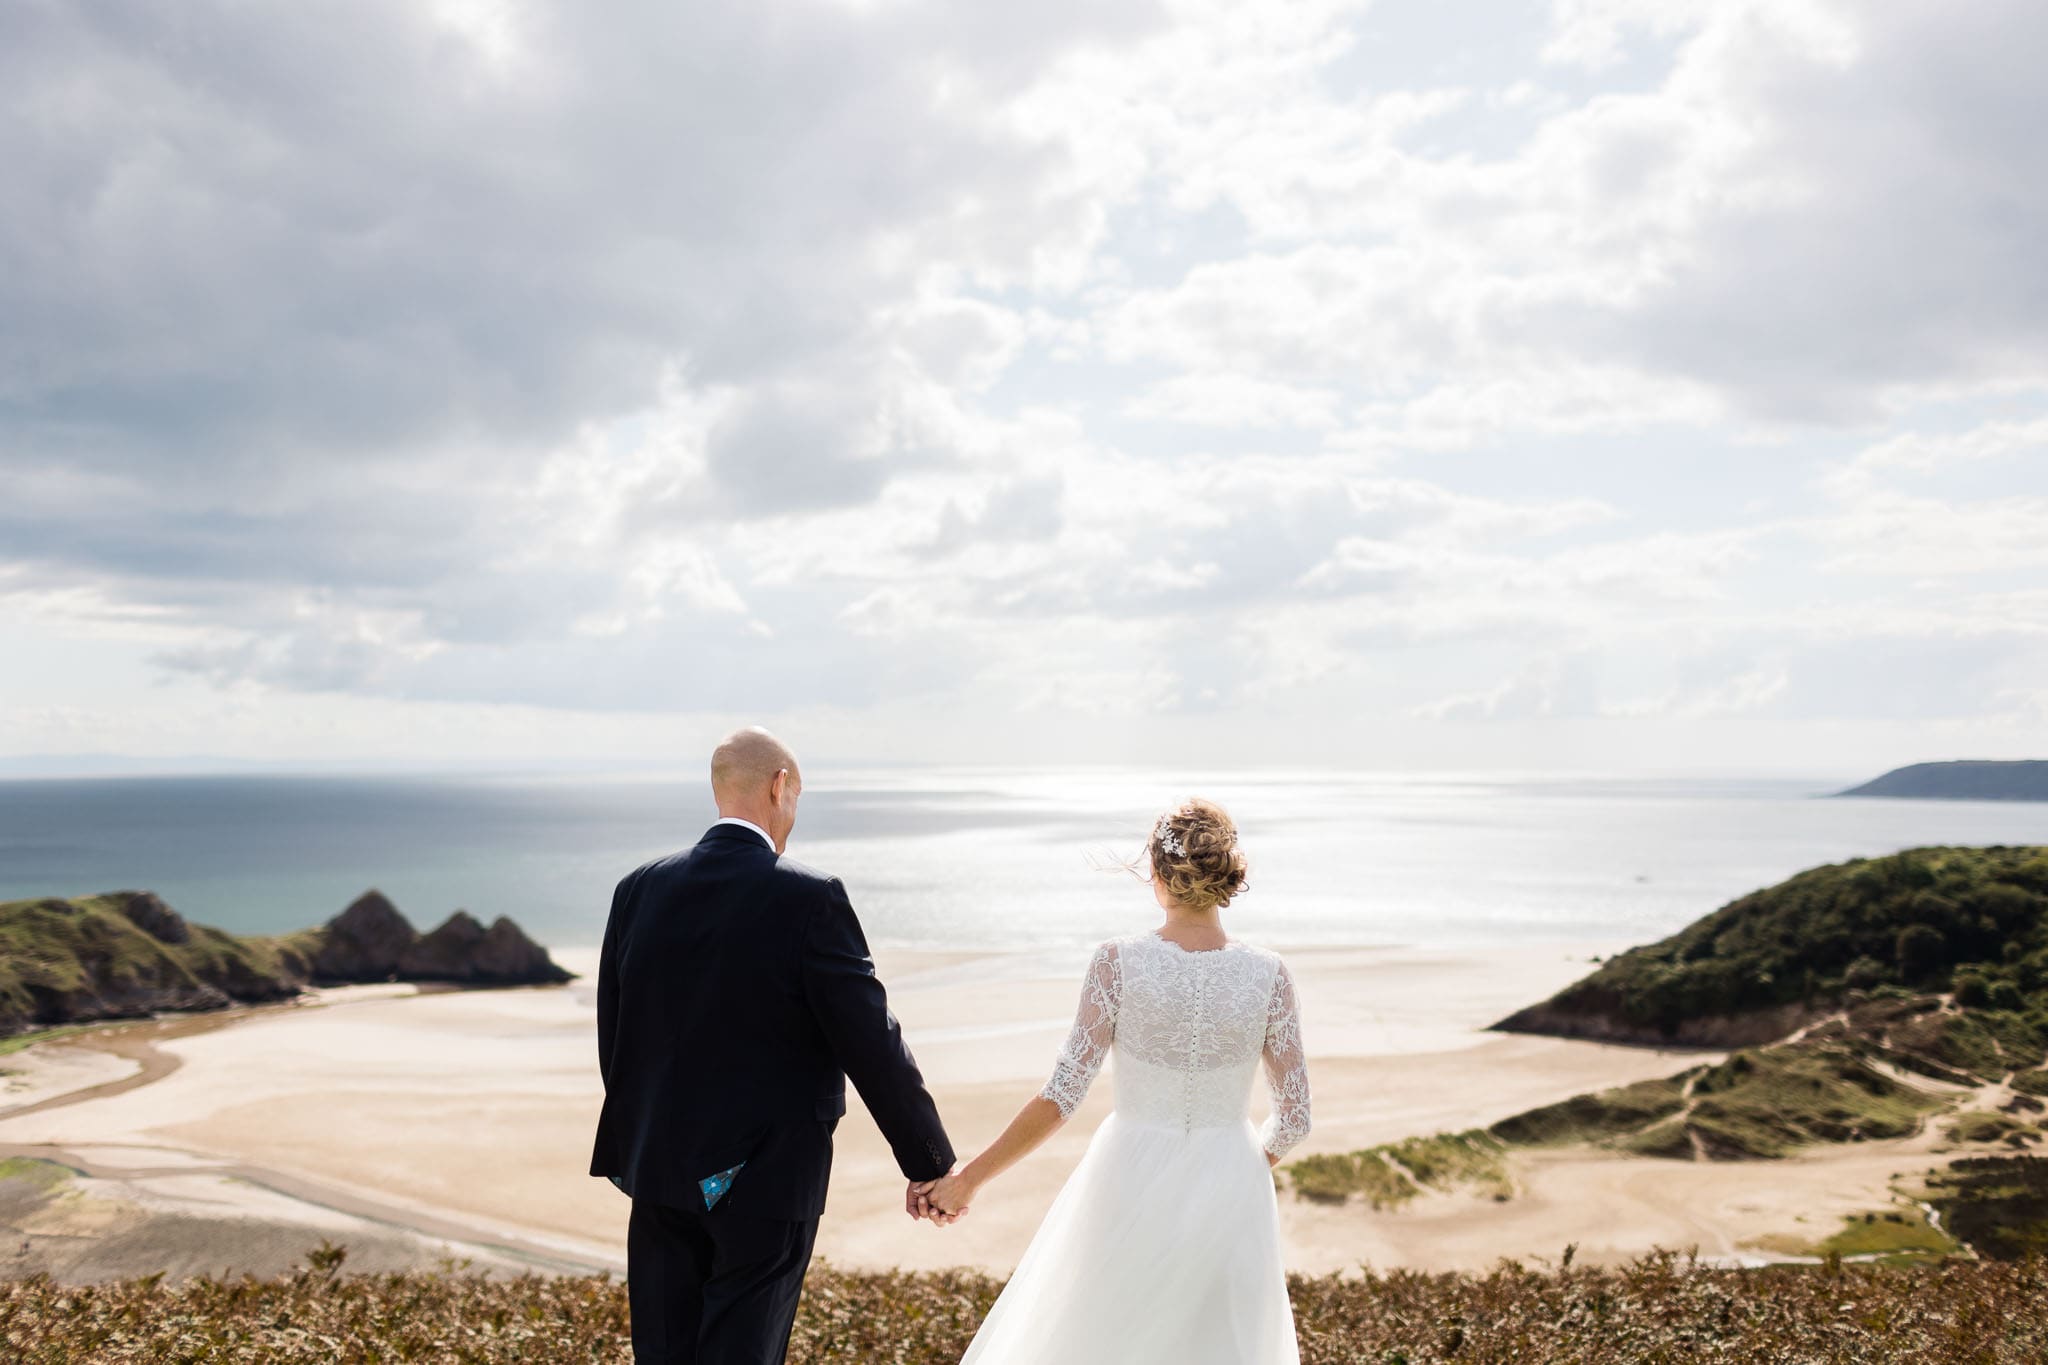 elopement photography wales three cliffs bay